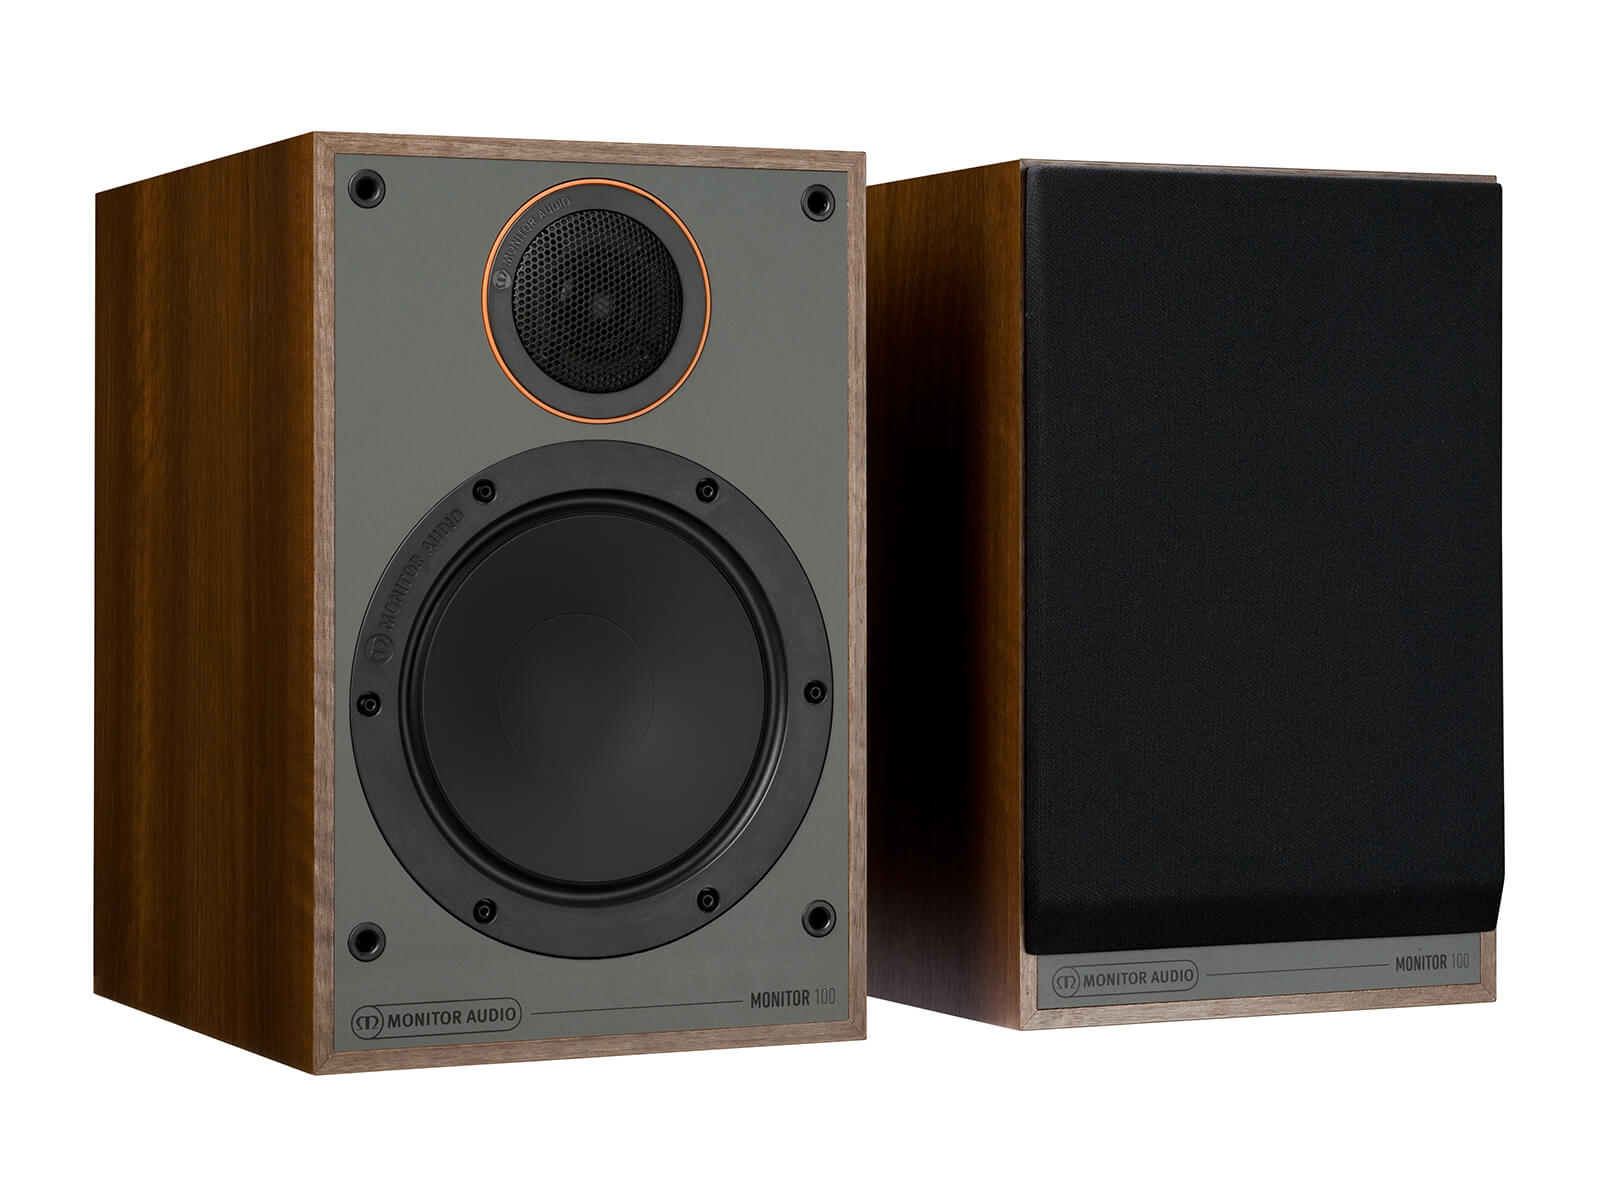 Monitor 100, bookshelf speakers, with and without grille in a walnut vinyl finish.